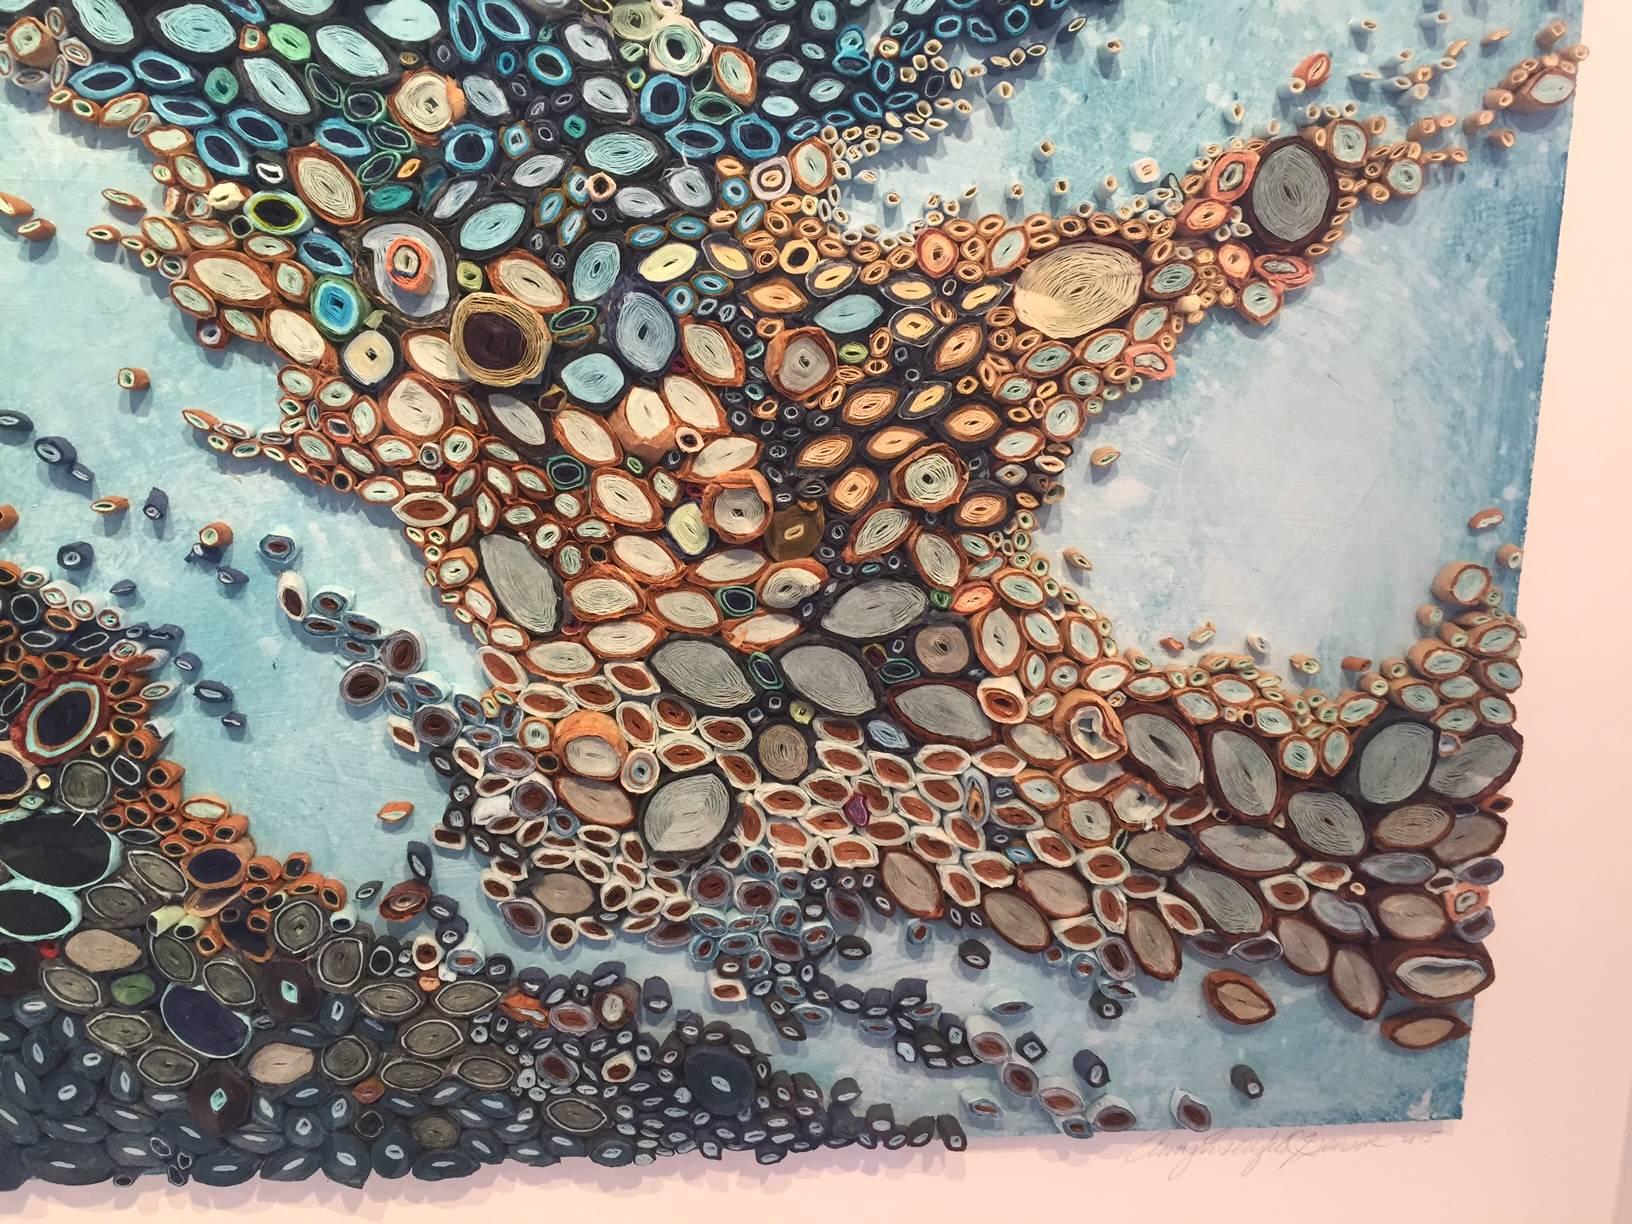 Pulled to Pools 3 Dimensional paper piece - Contemporary Mixed Media Art by Amy Genser